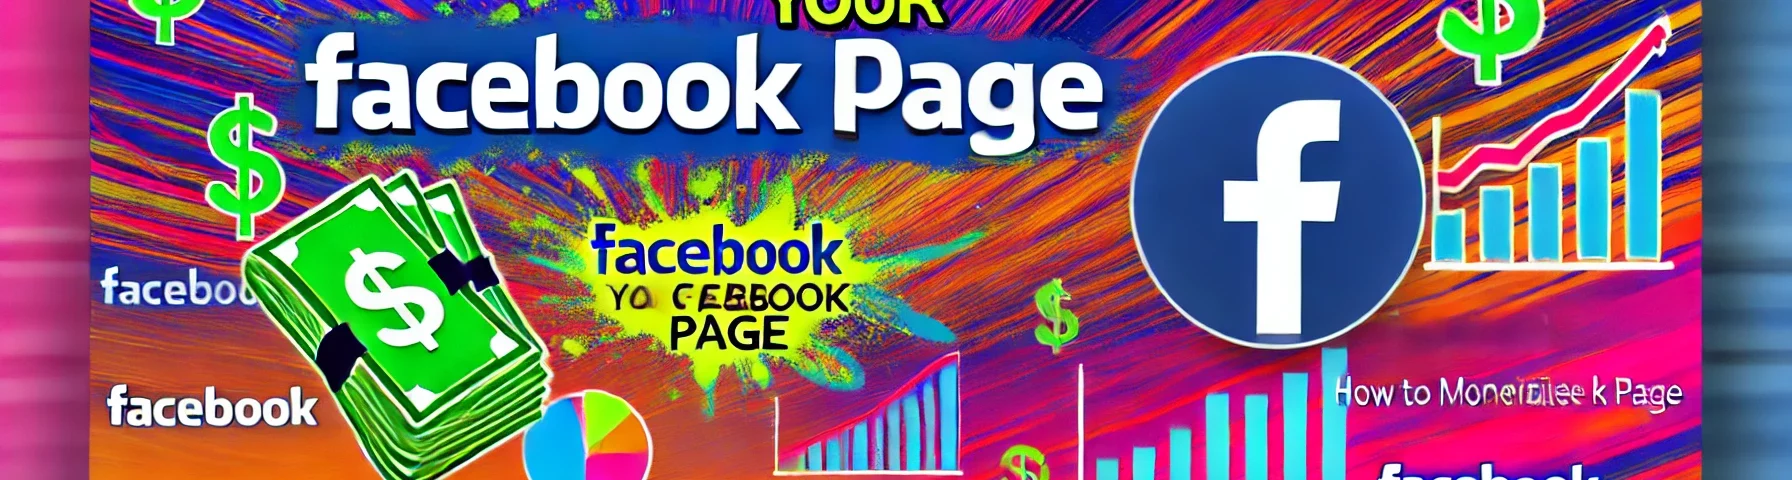 how to monetize your facebook page